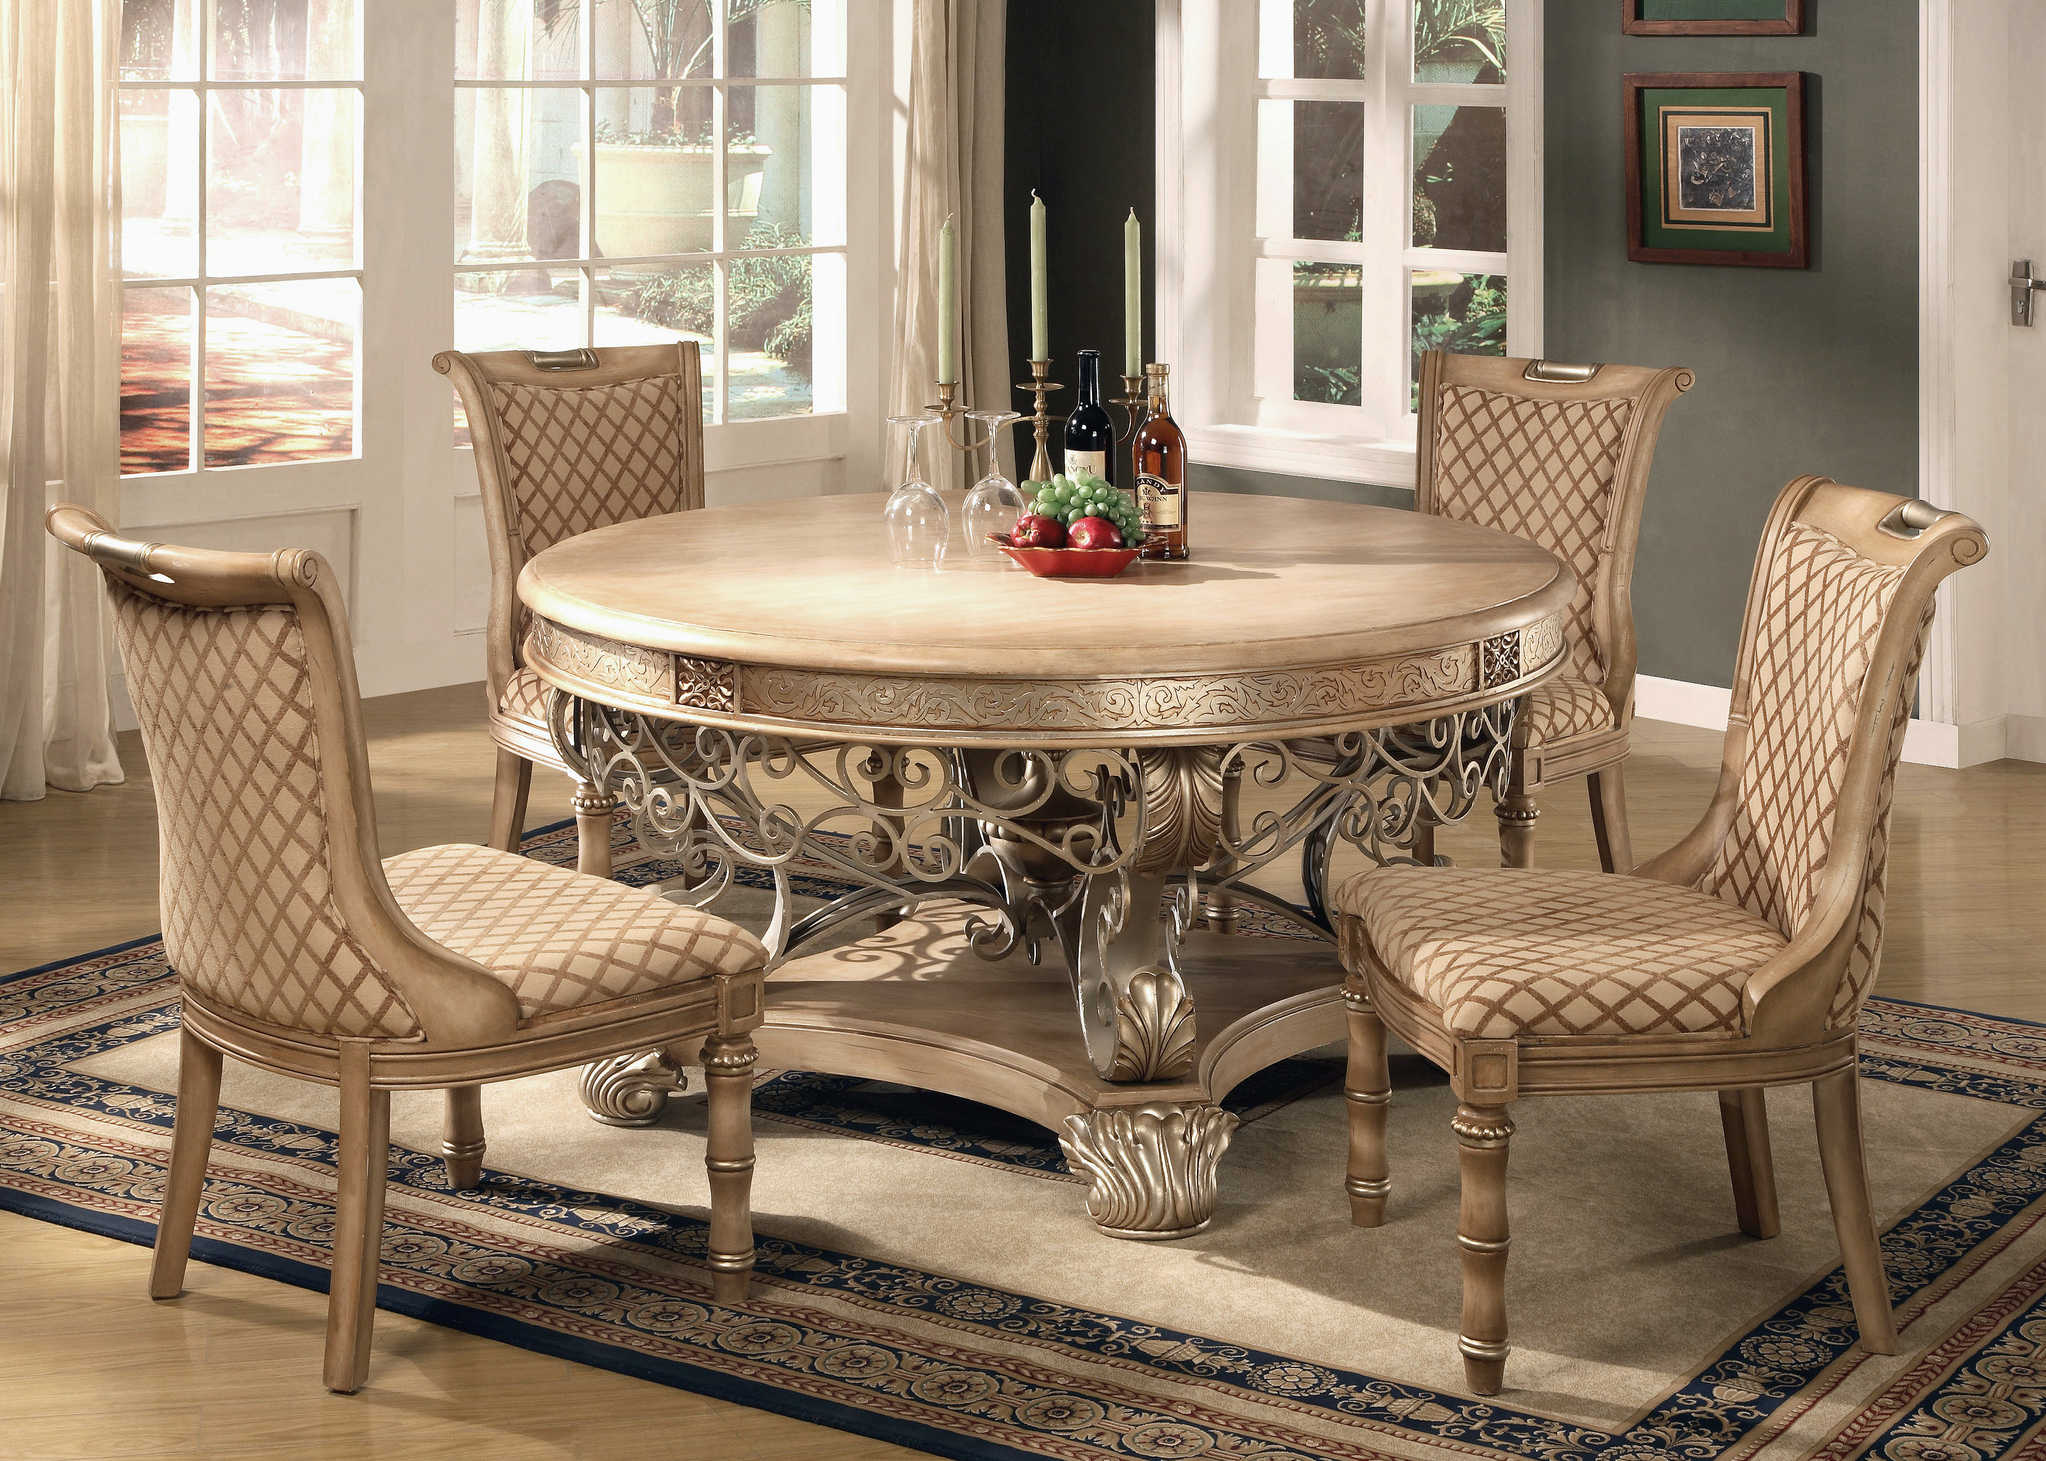 Dining Room Table And Chairs Ideas With Images